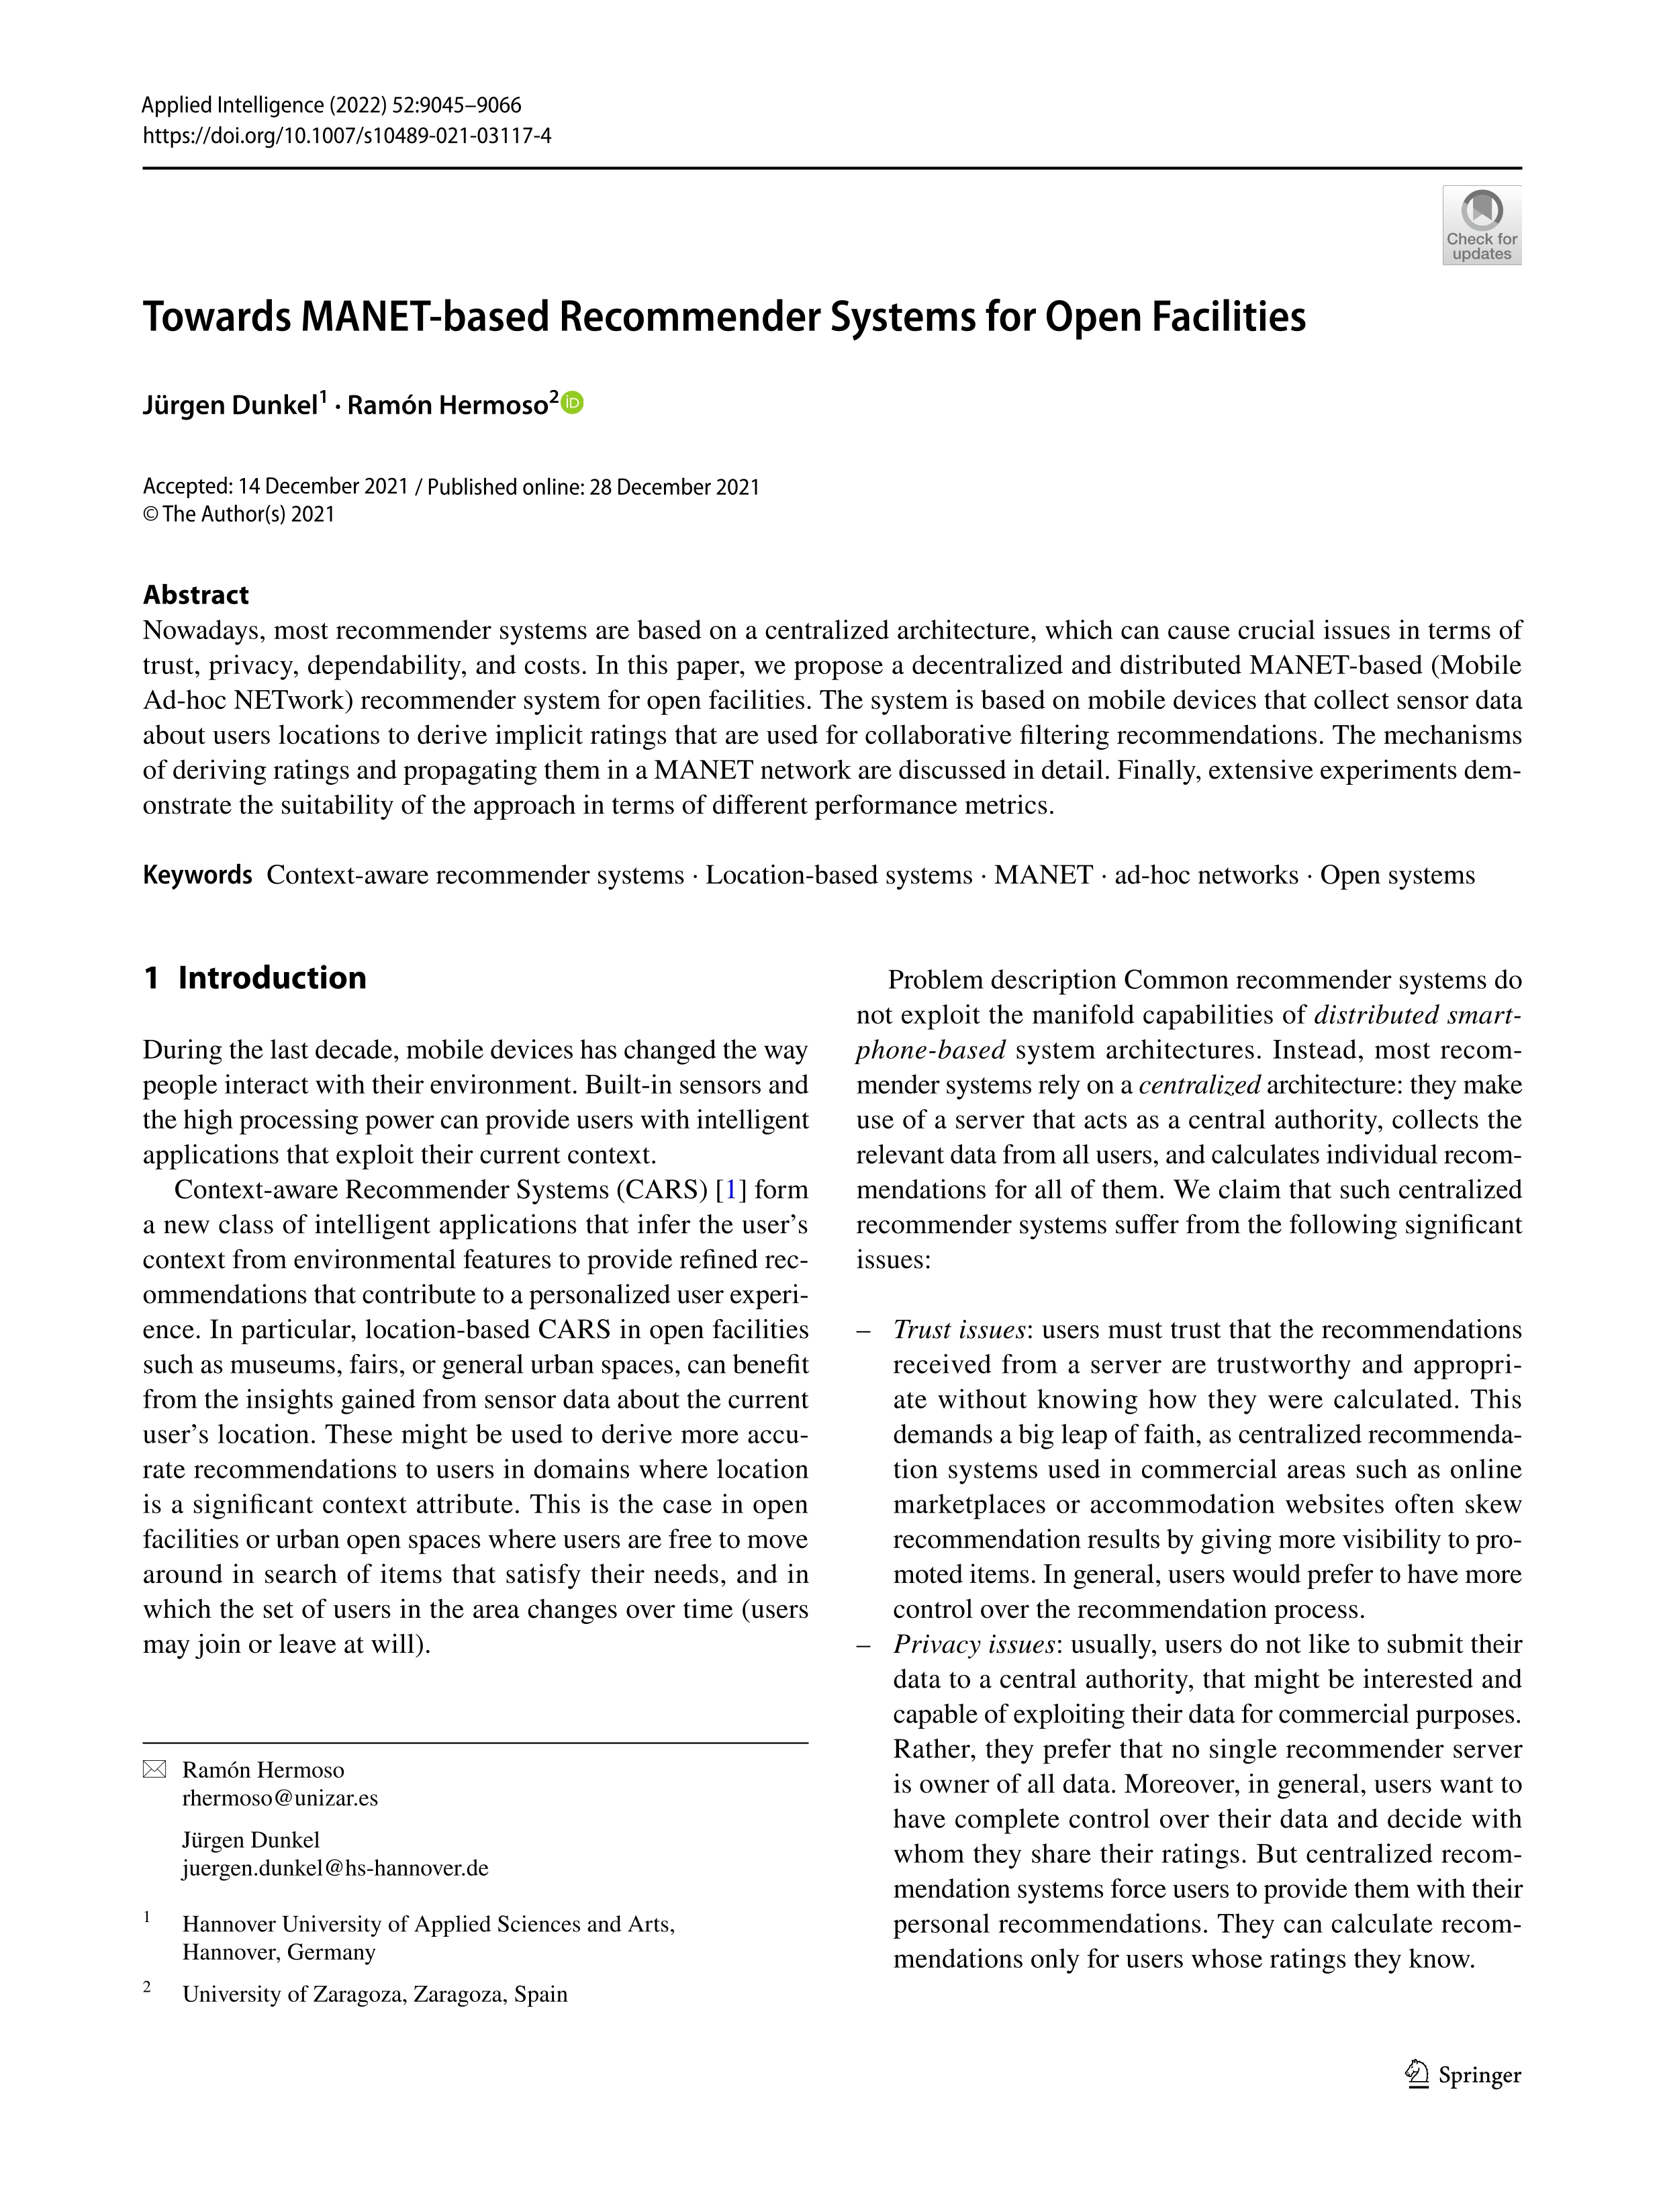 Towards MANET-based recommender systems for open facilities